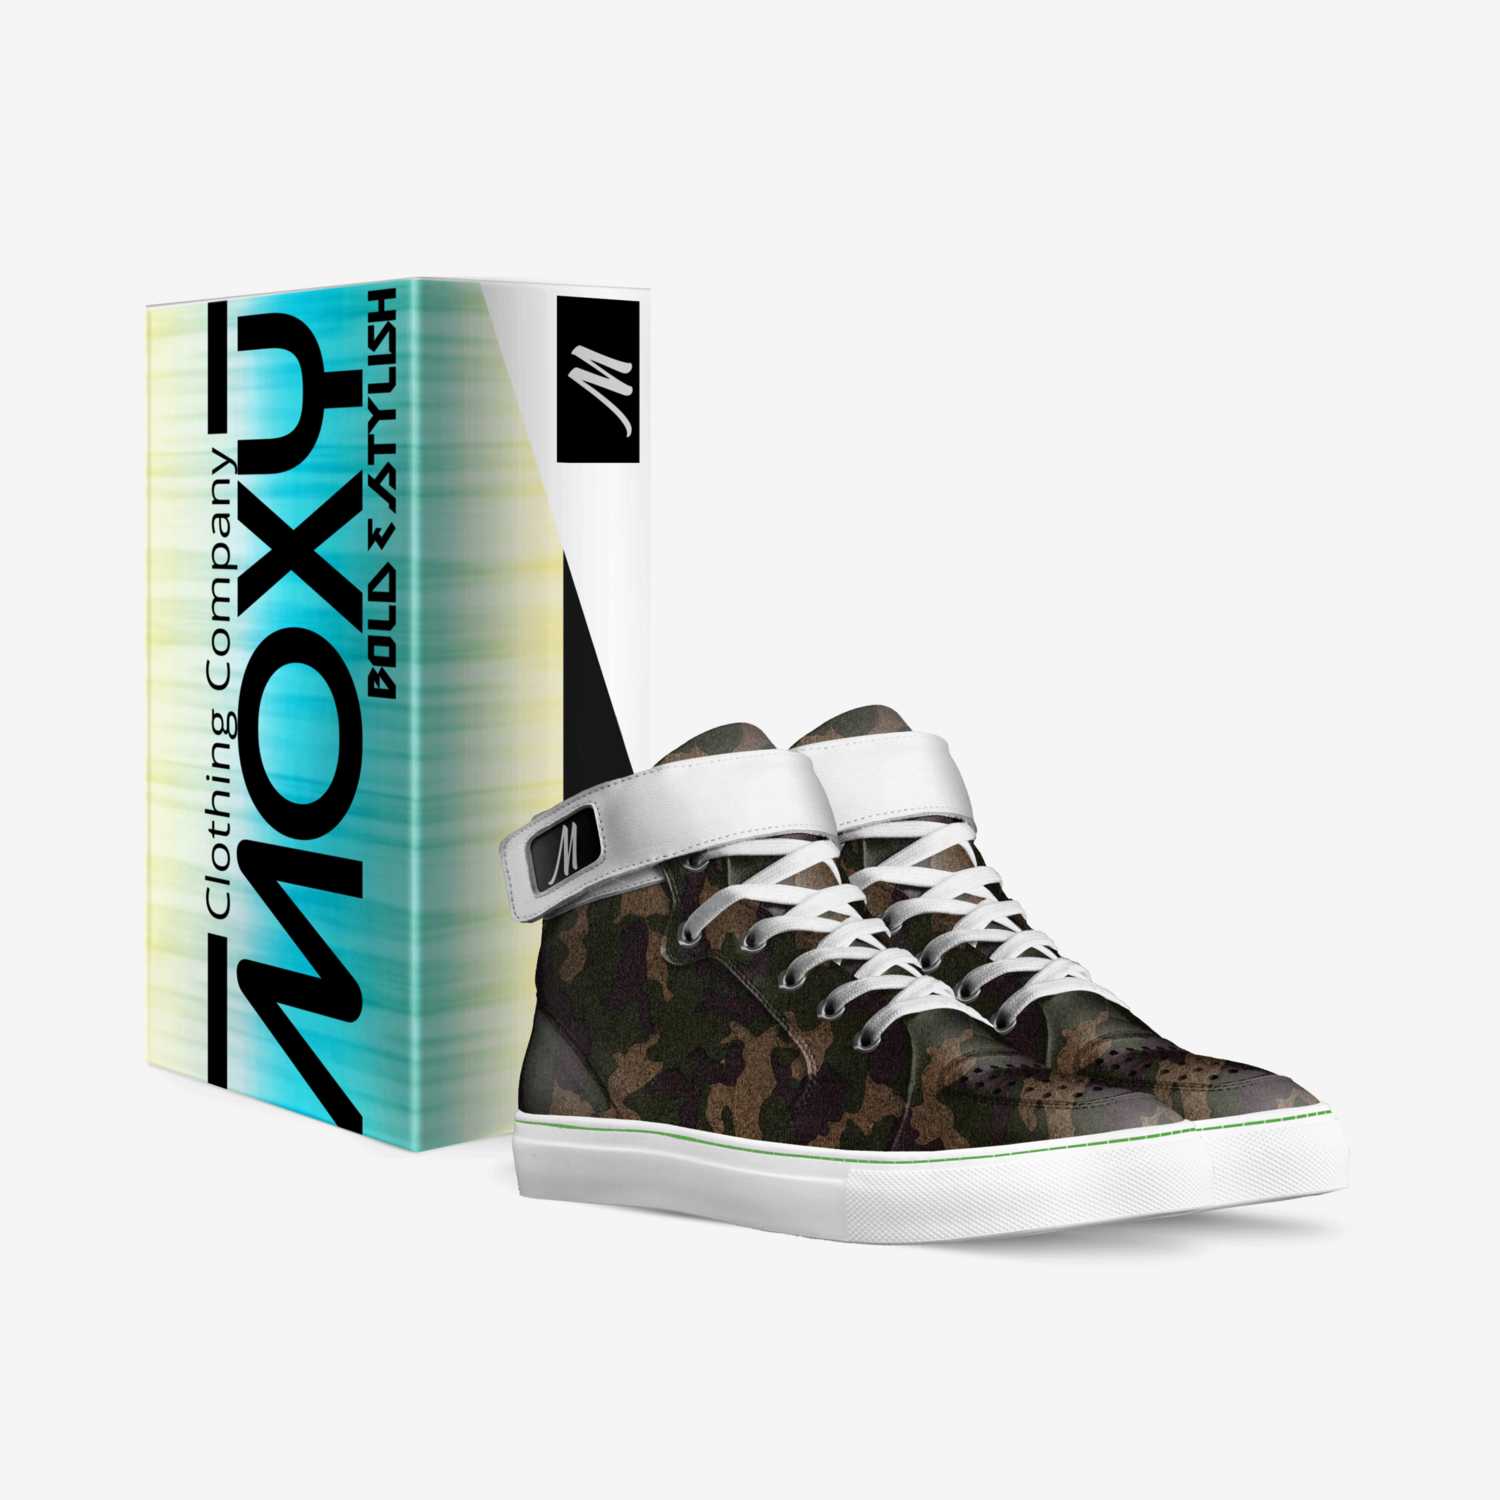 Elites custom made in Italy shoes by Moxy Clothing Co. | Box view